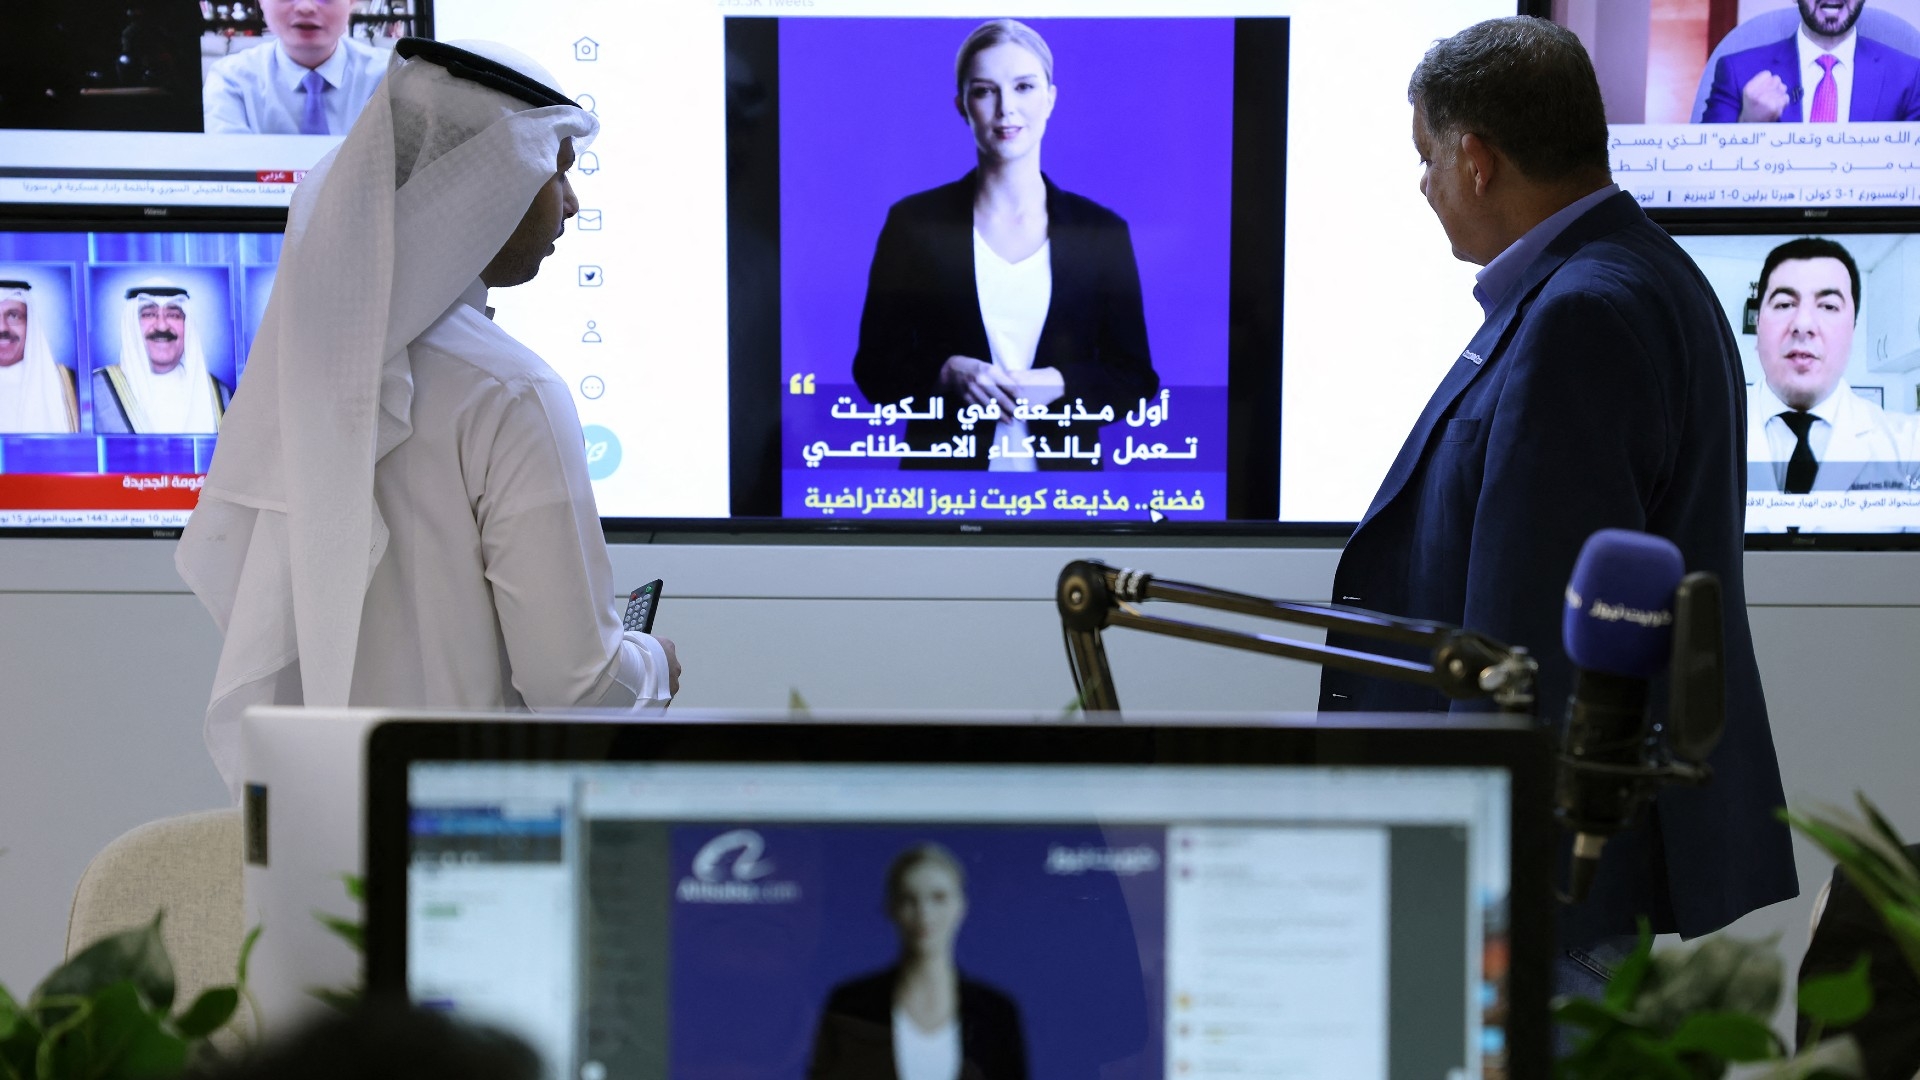 Journalists watch an introductory video by the 'artificial intelligence' anchor Fedha on the Twitter account of Kuwait News service, in Kuwait City on 9 April 2023 (AFP)